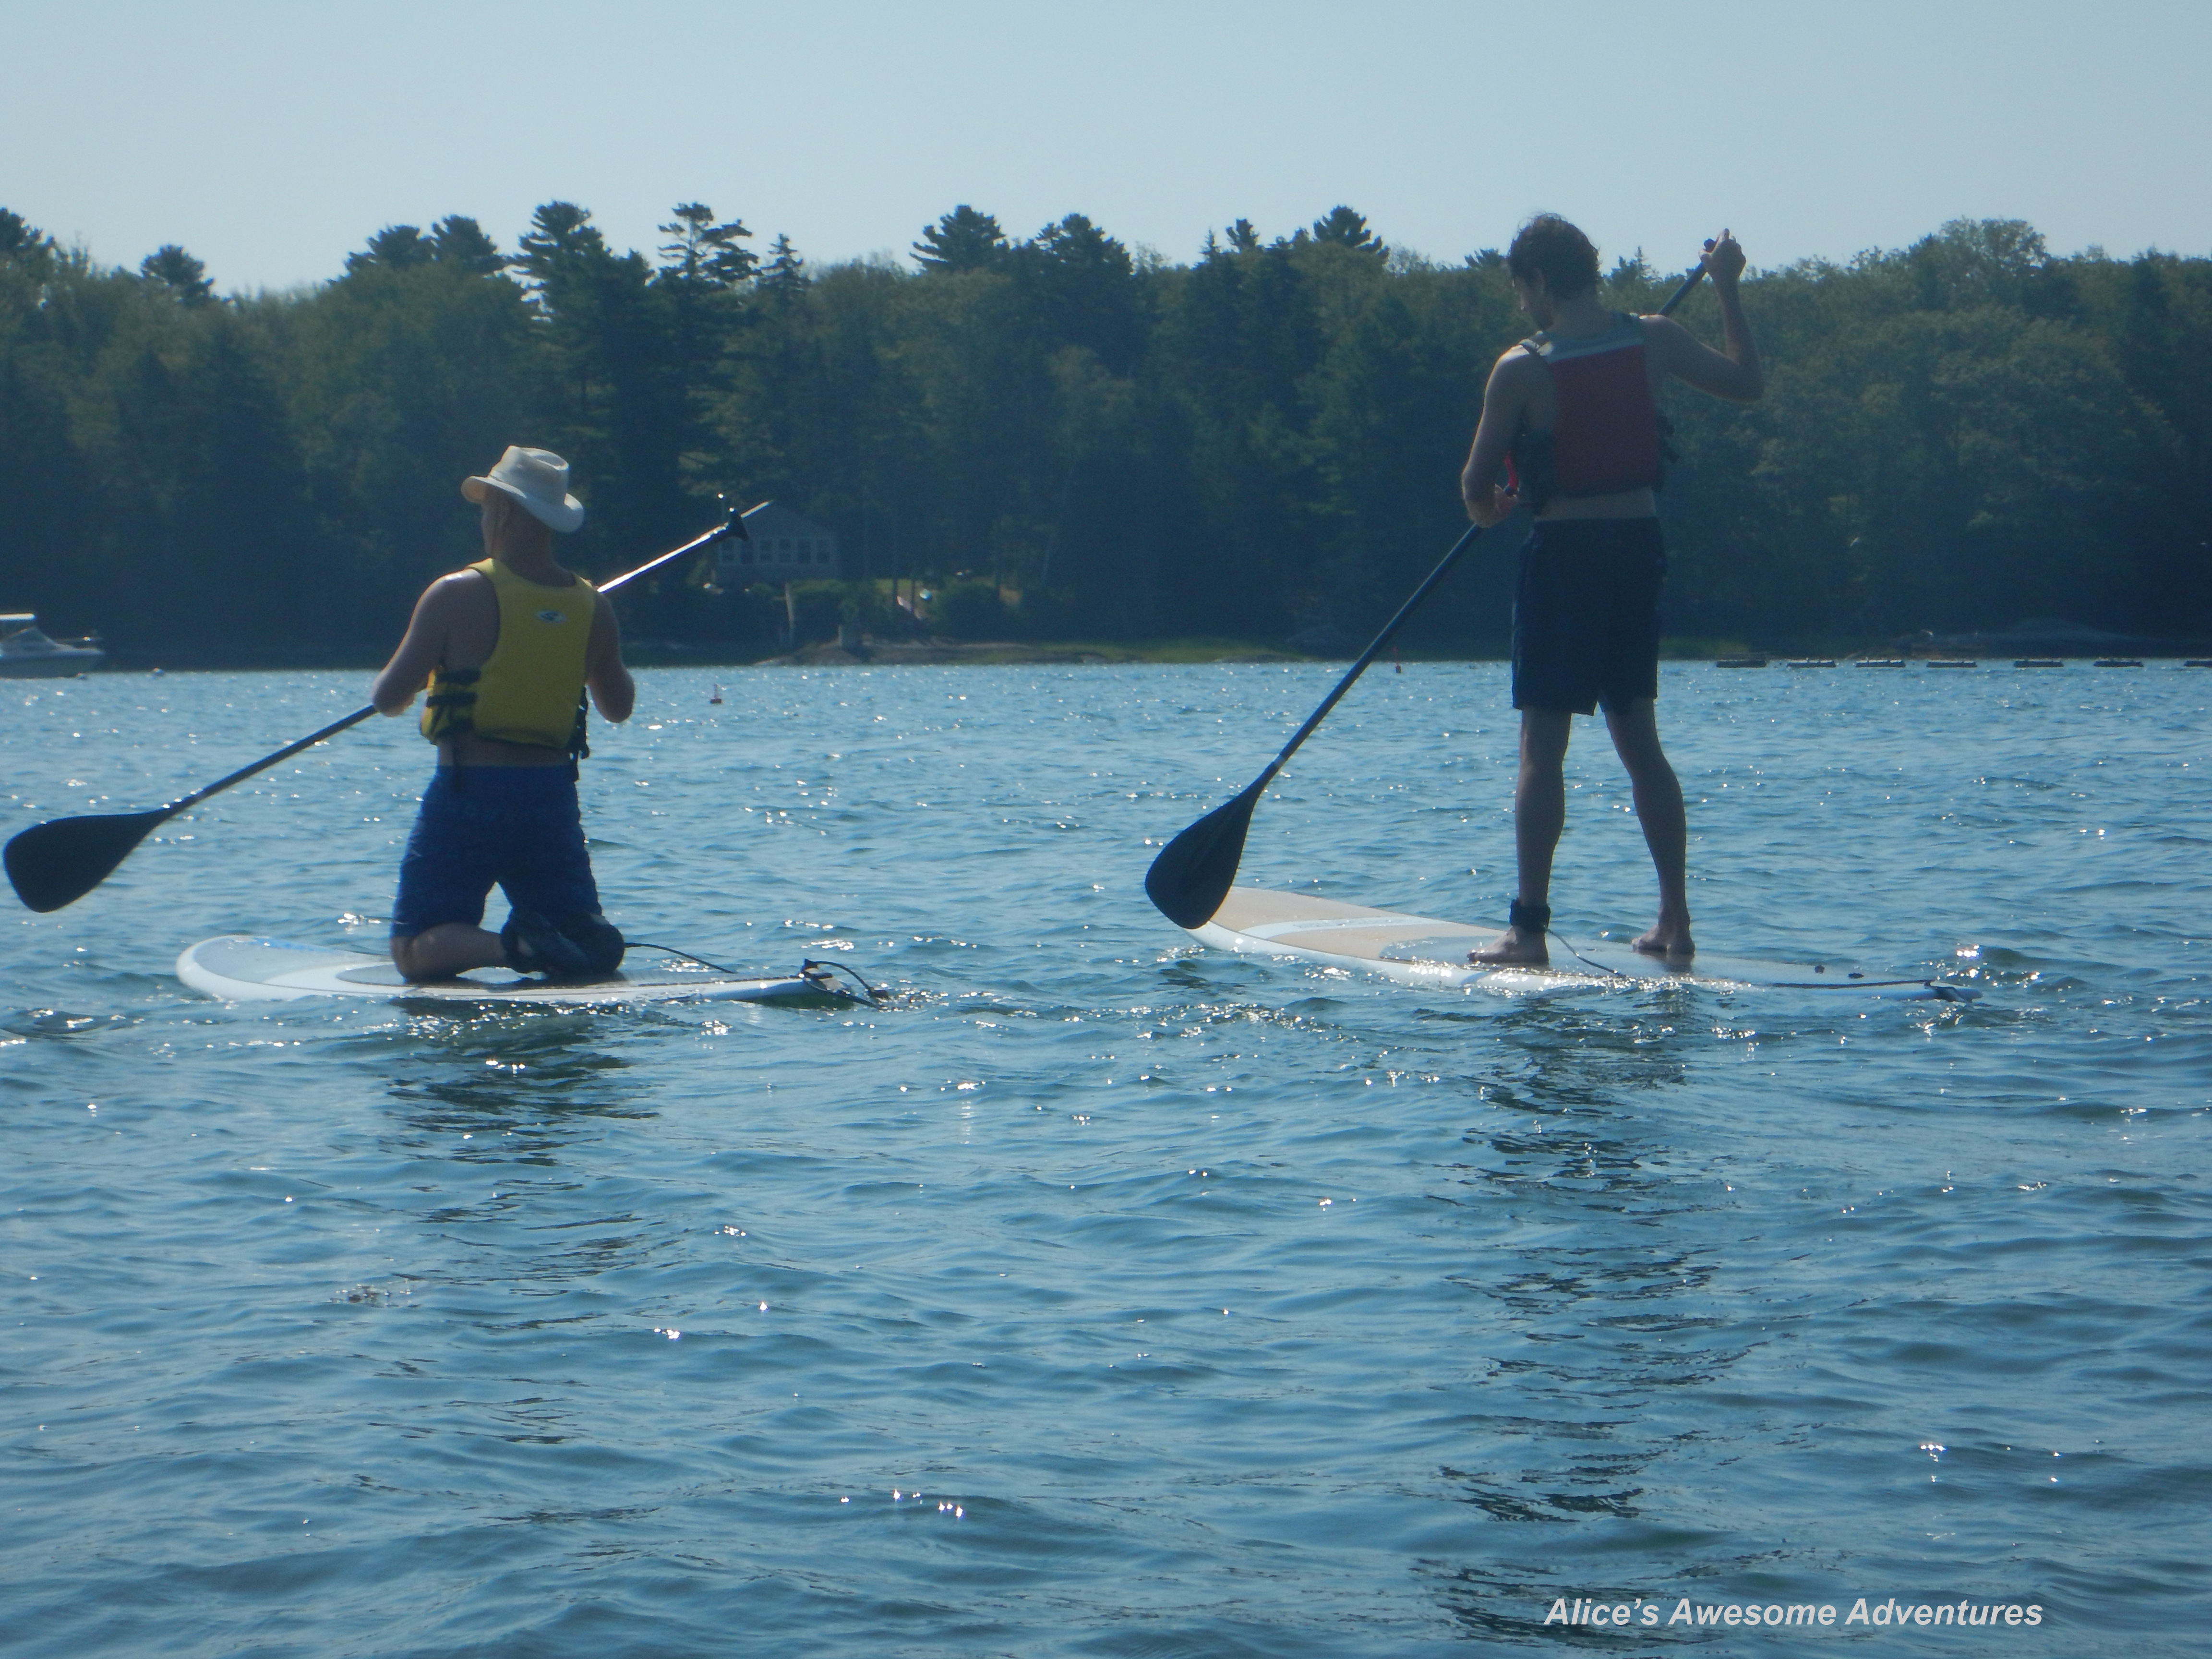 Two friends on SUP's.